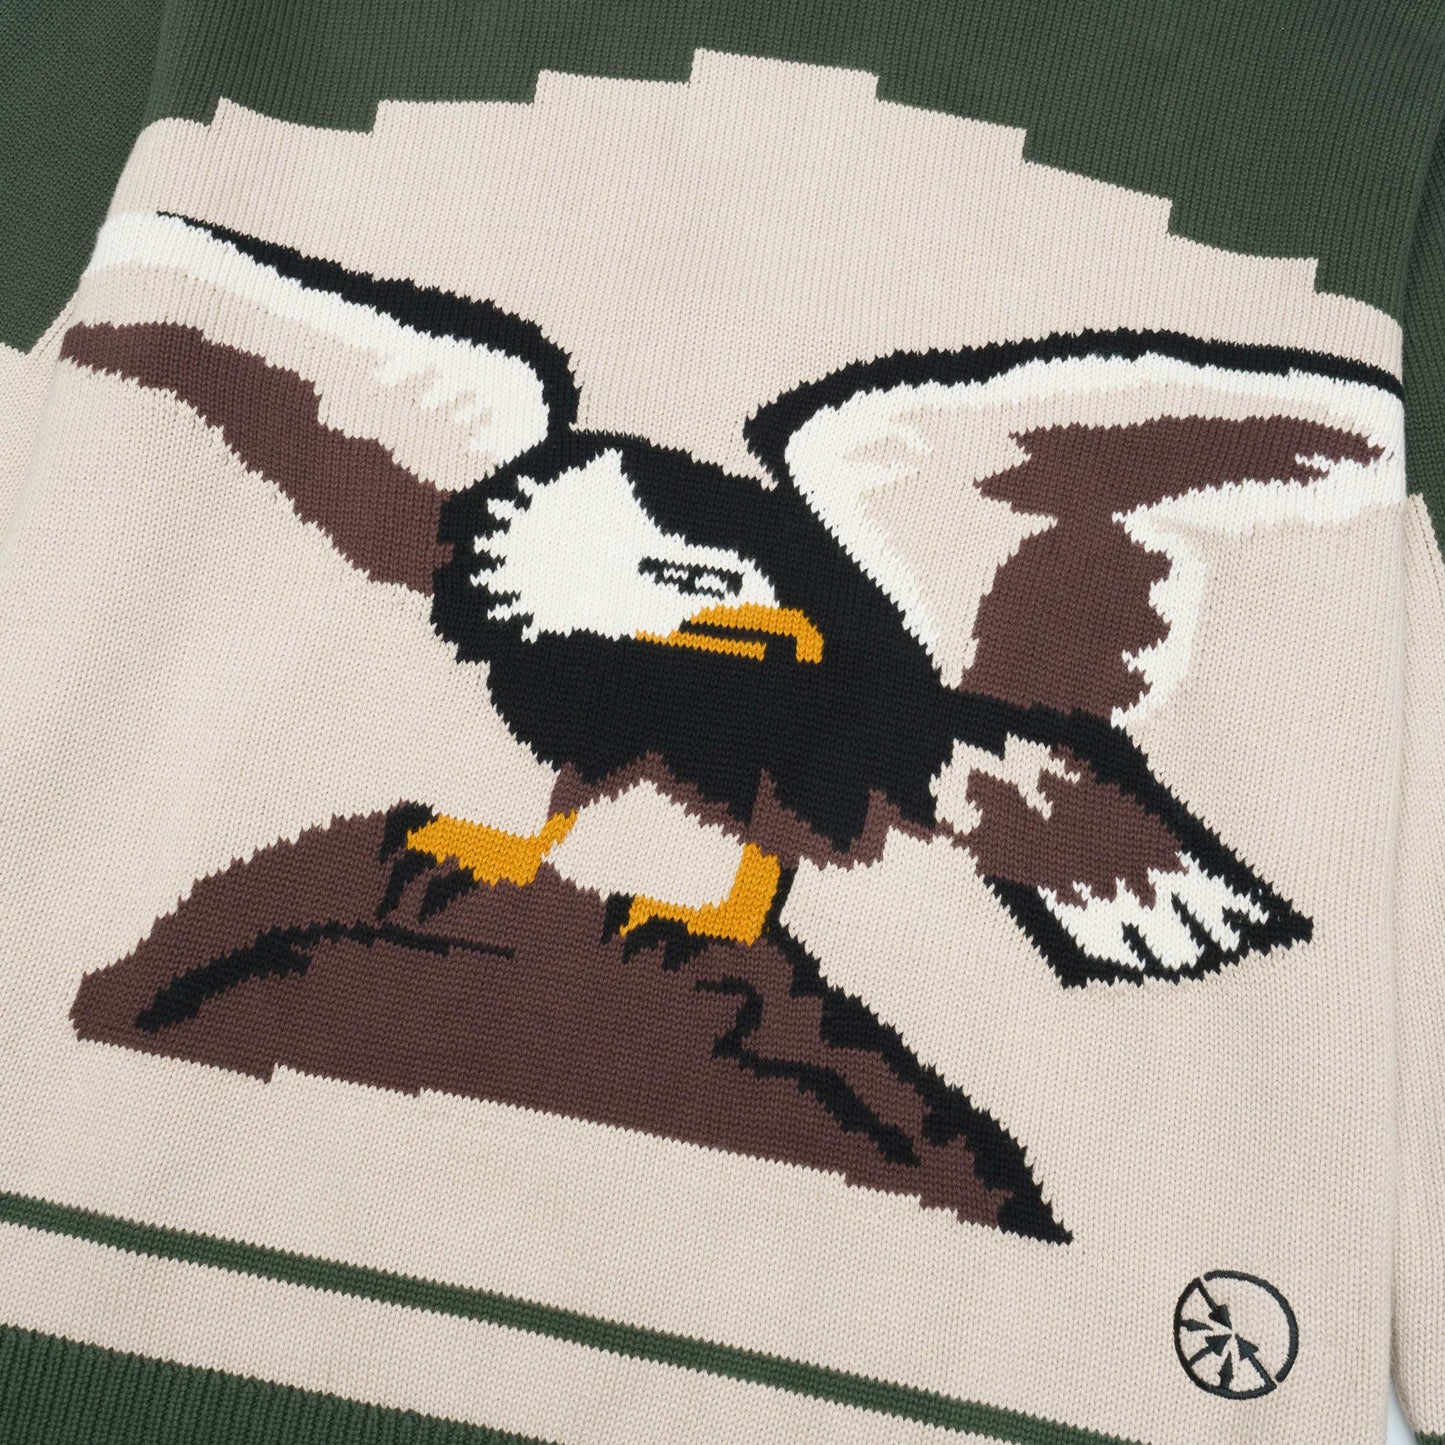 "EAGLE" INTARSIA KNITTED BEIGE SWEATER